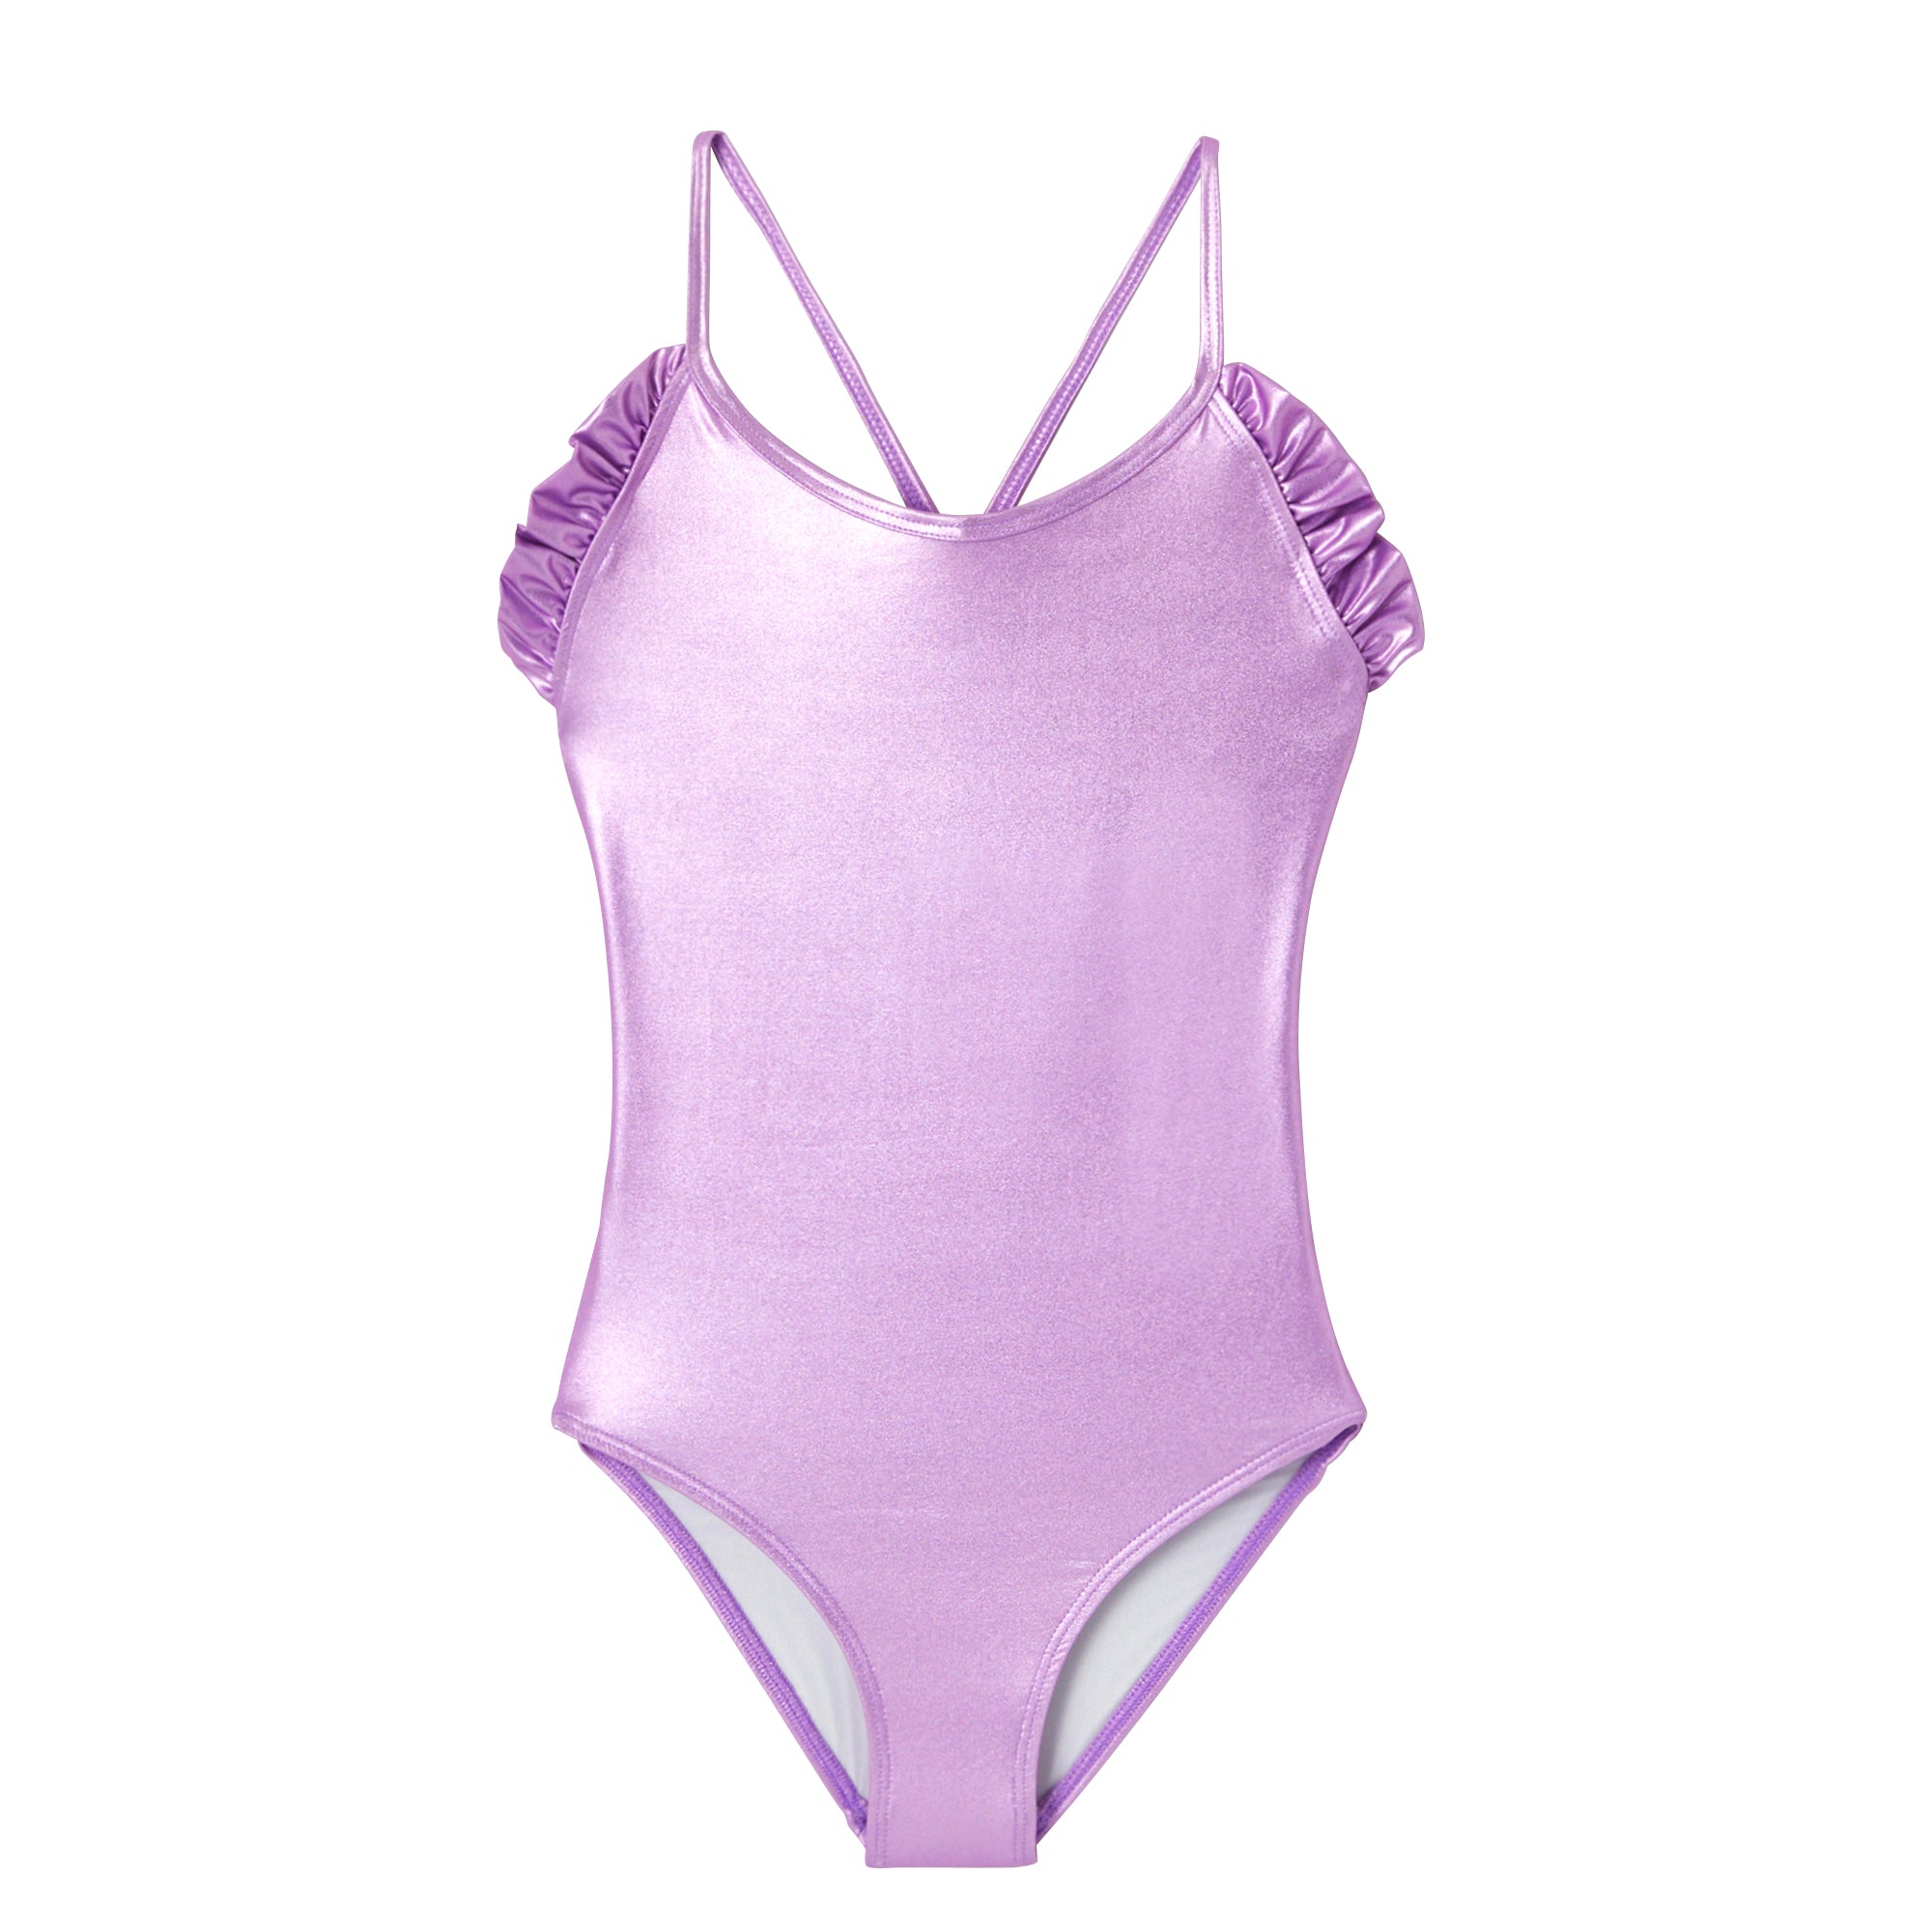 Girls' iridescent lilac one-piece swimsuit